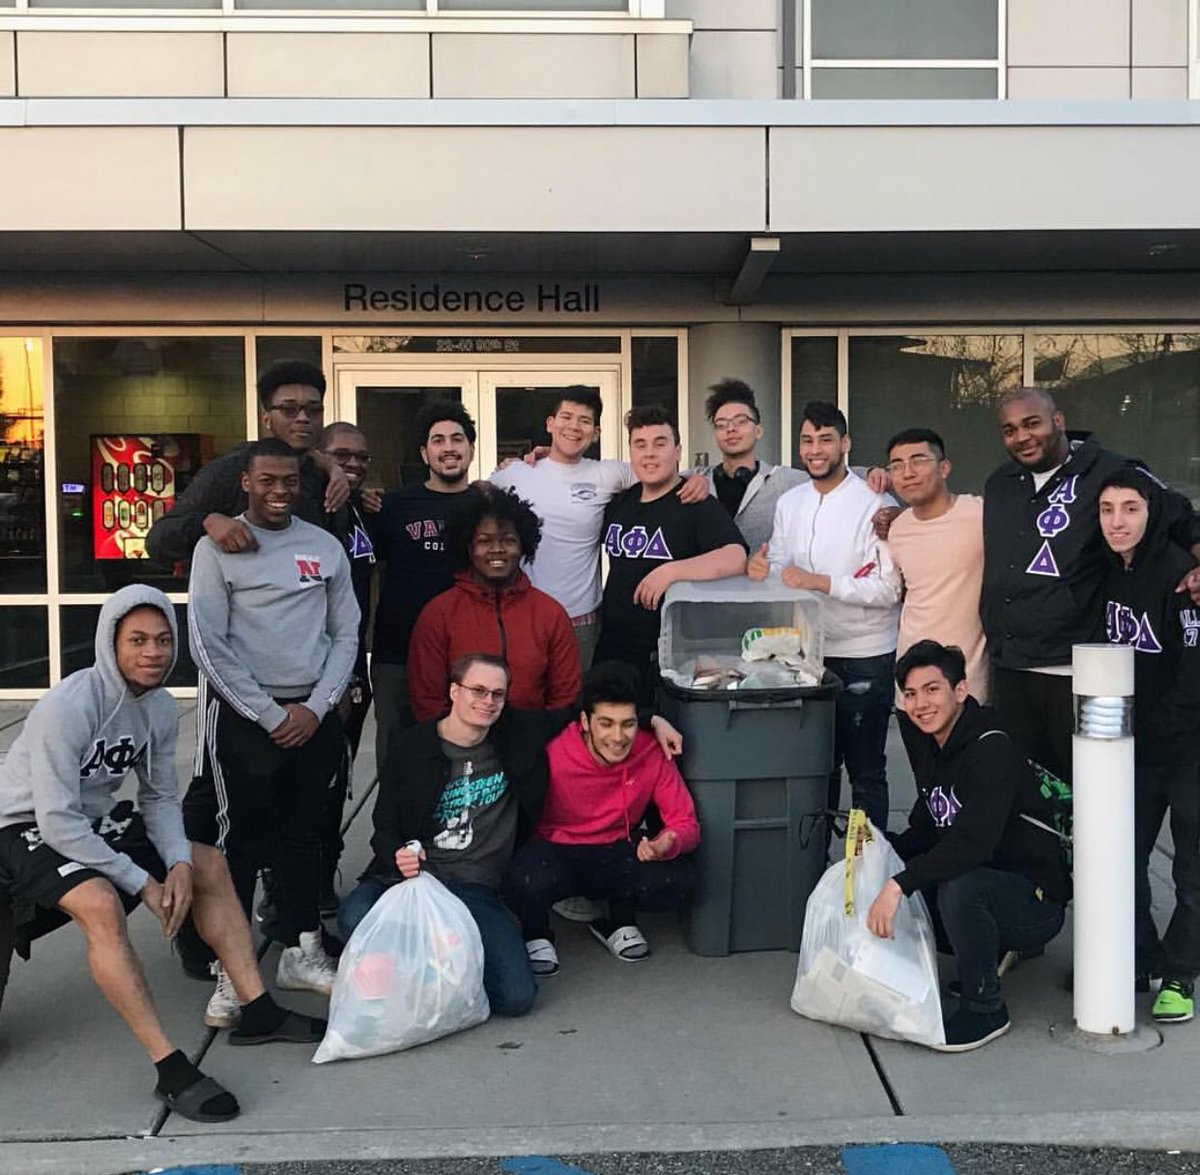 The brothers of Epsilon Xi celebrating Earth Day by cleaning up the Vaughn College grounds.
#faciamus #Earthday #VCAT @VaughnCollege